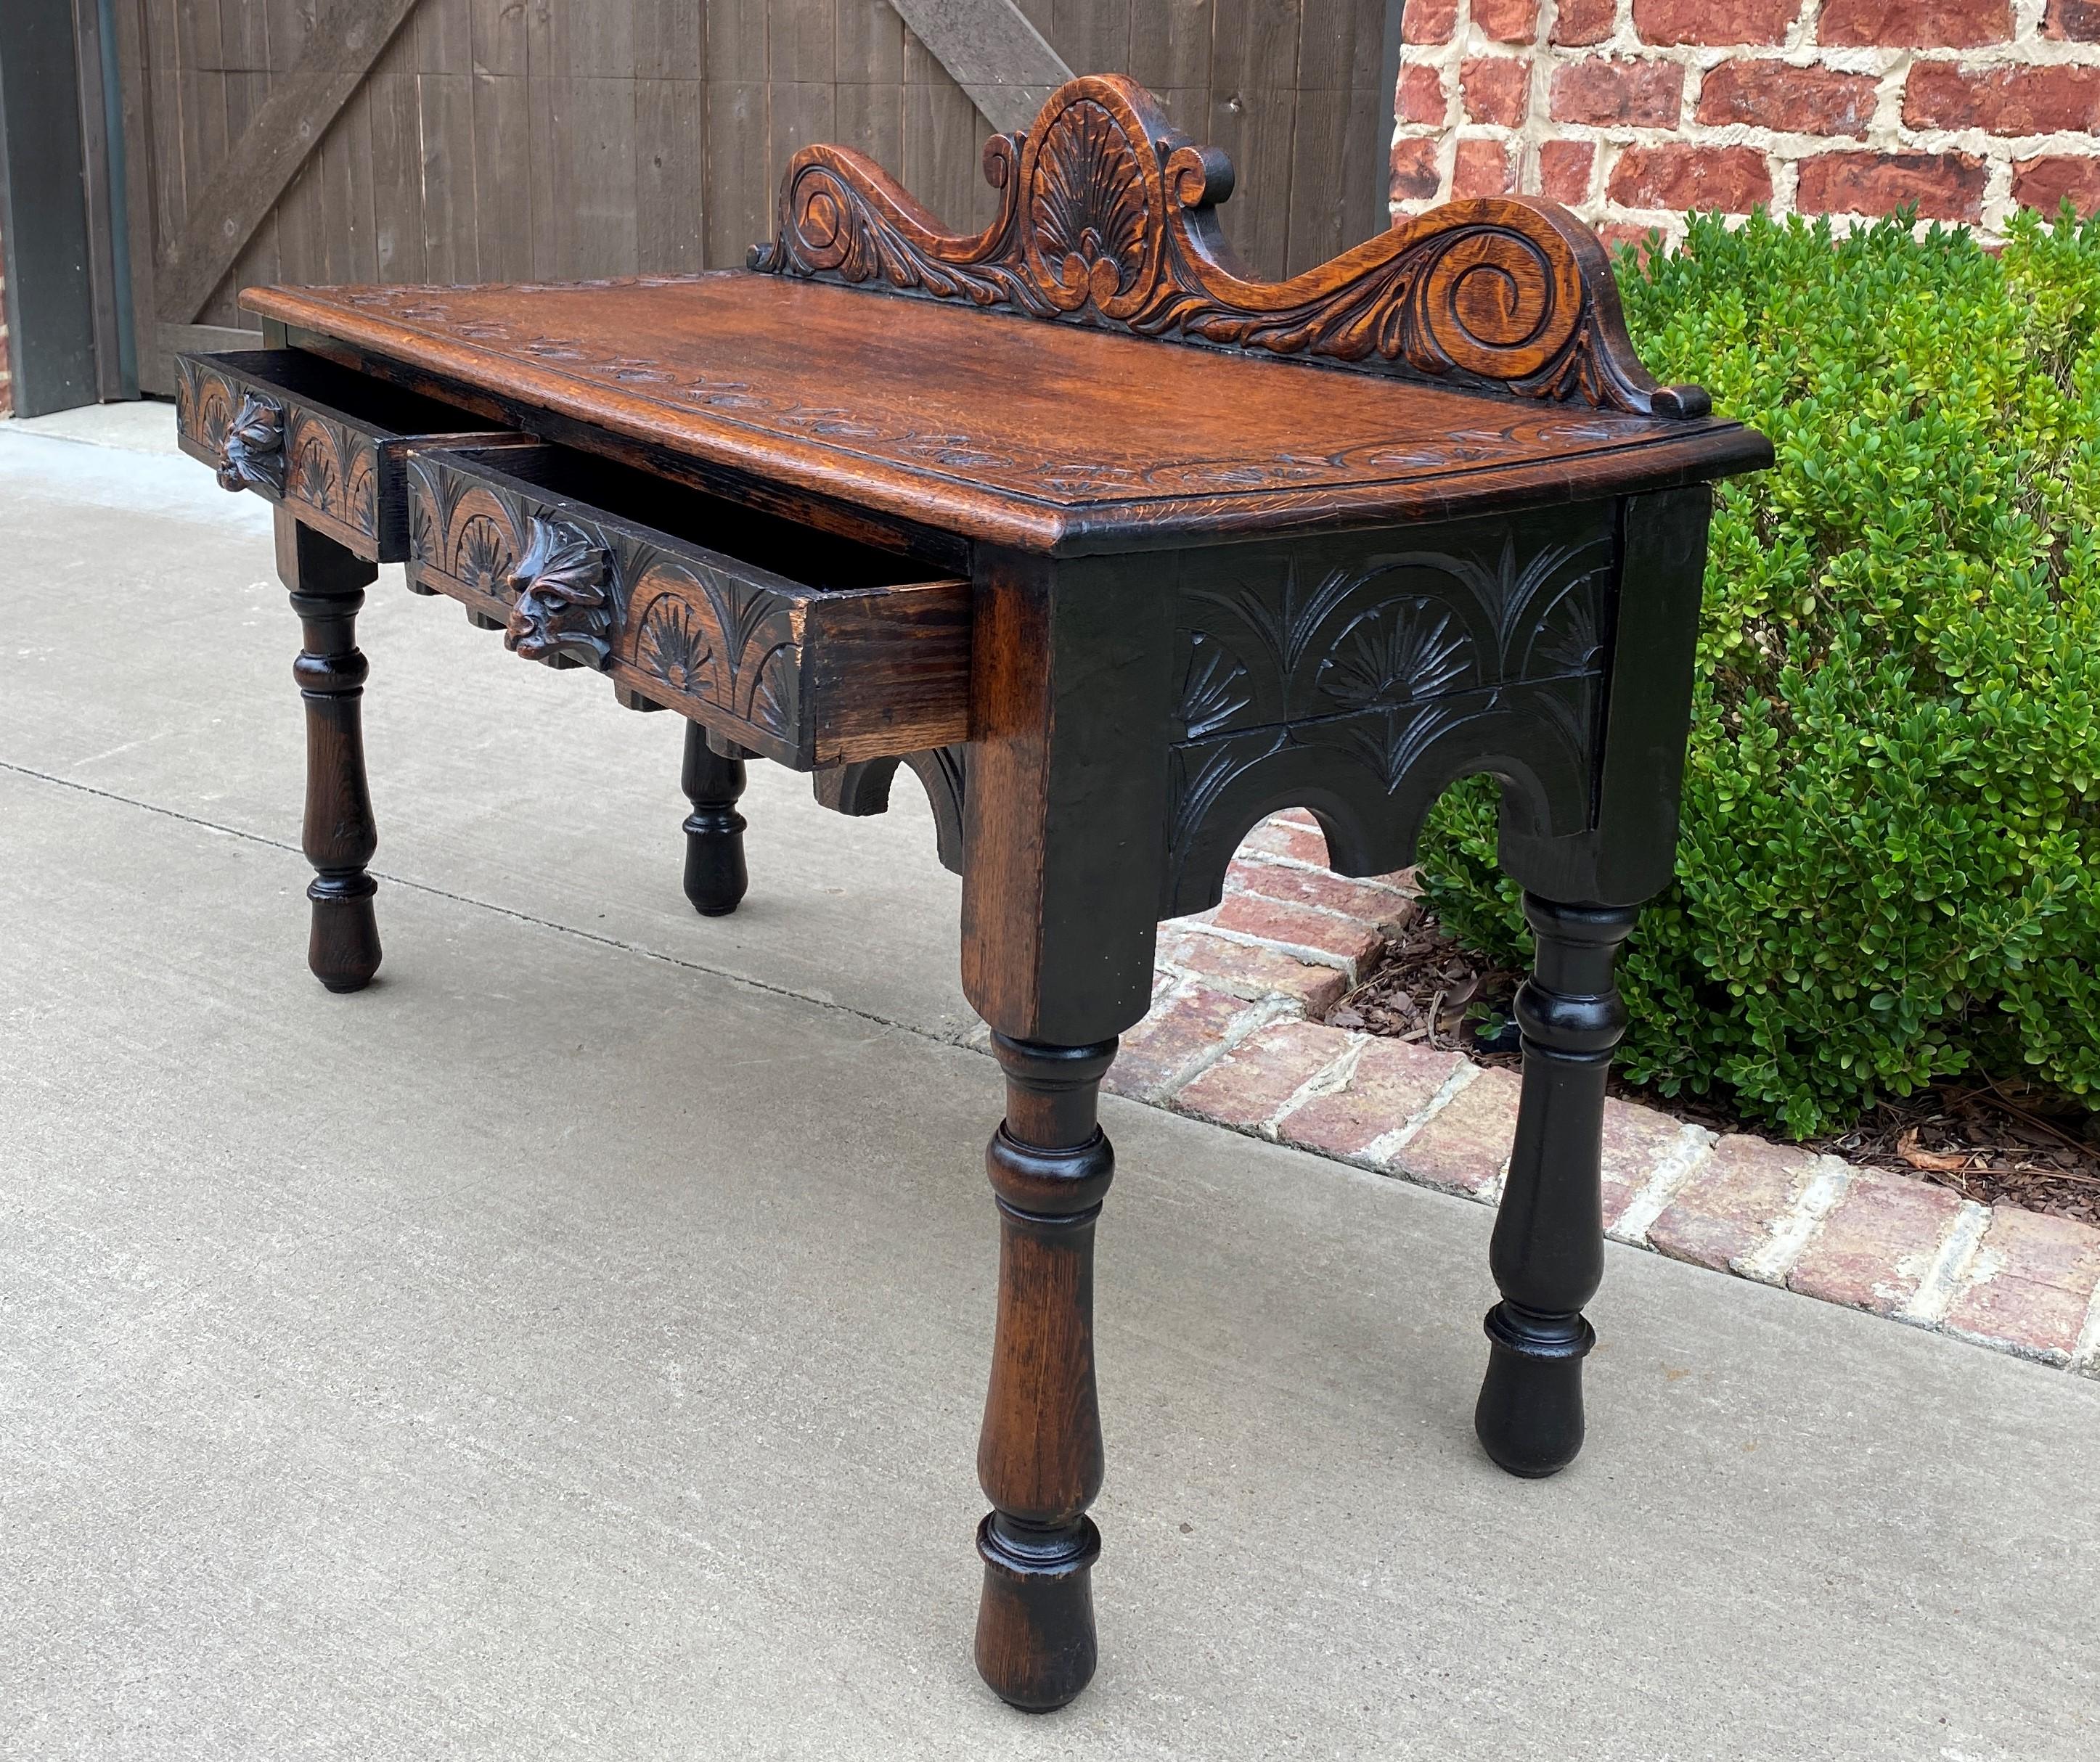 Antique English Window Seat Bed Bench Gothic Revival Carved Oak 2 Drawers c.1900 For Sale 1